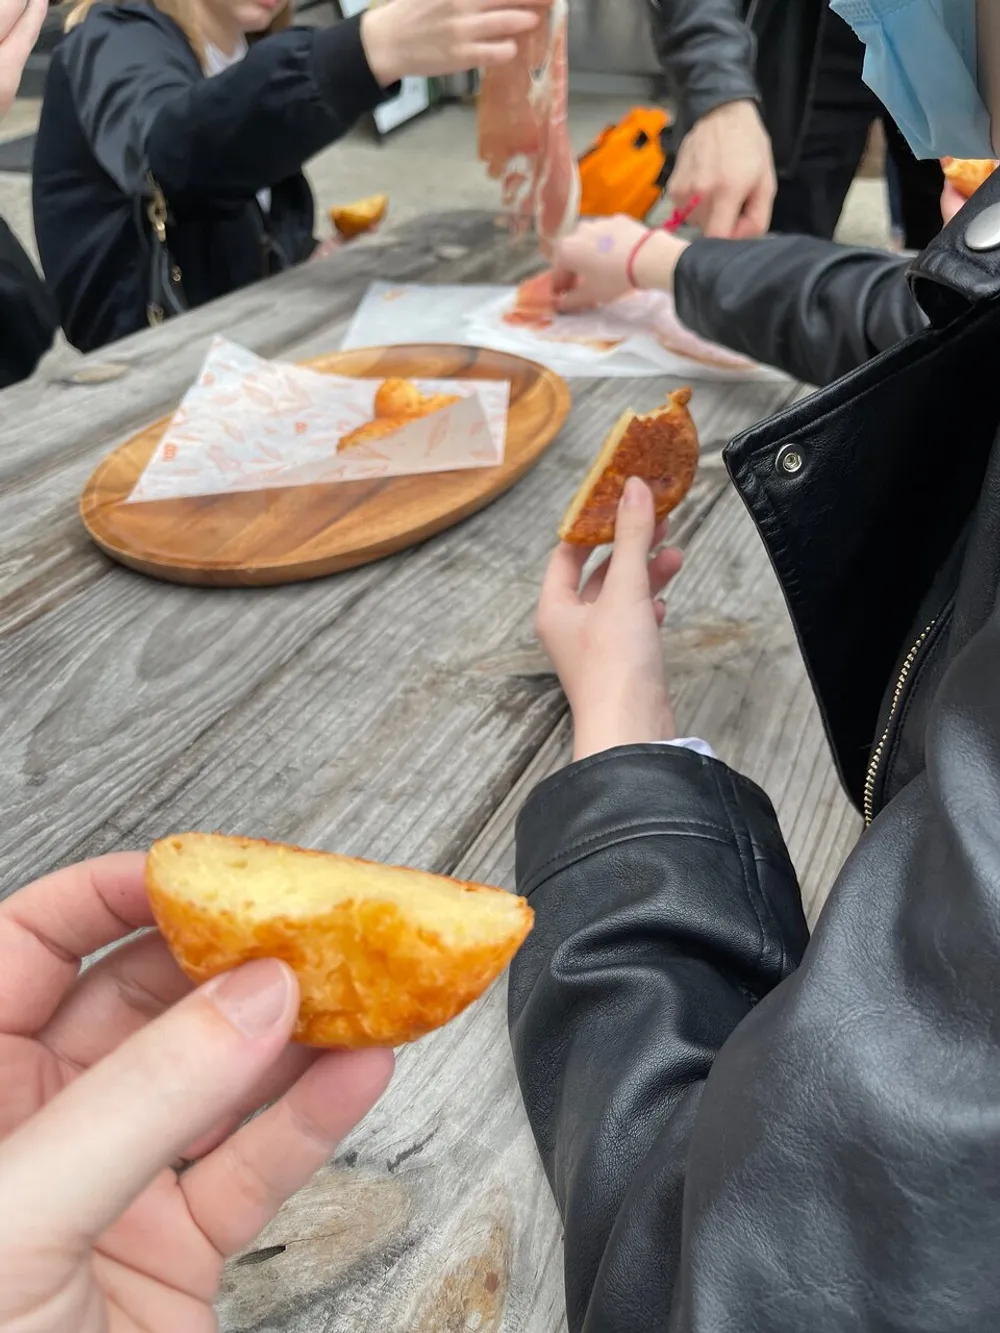 People are sharing and enjoying various fried foods at an outdoor wooden table